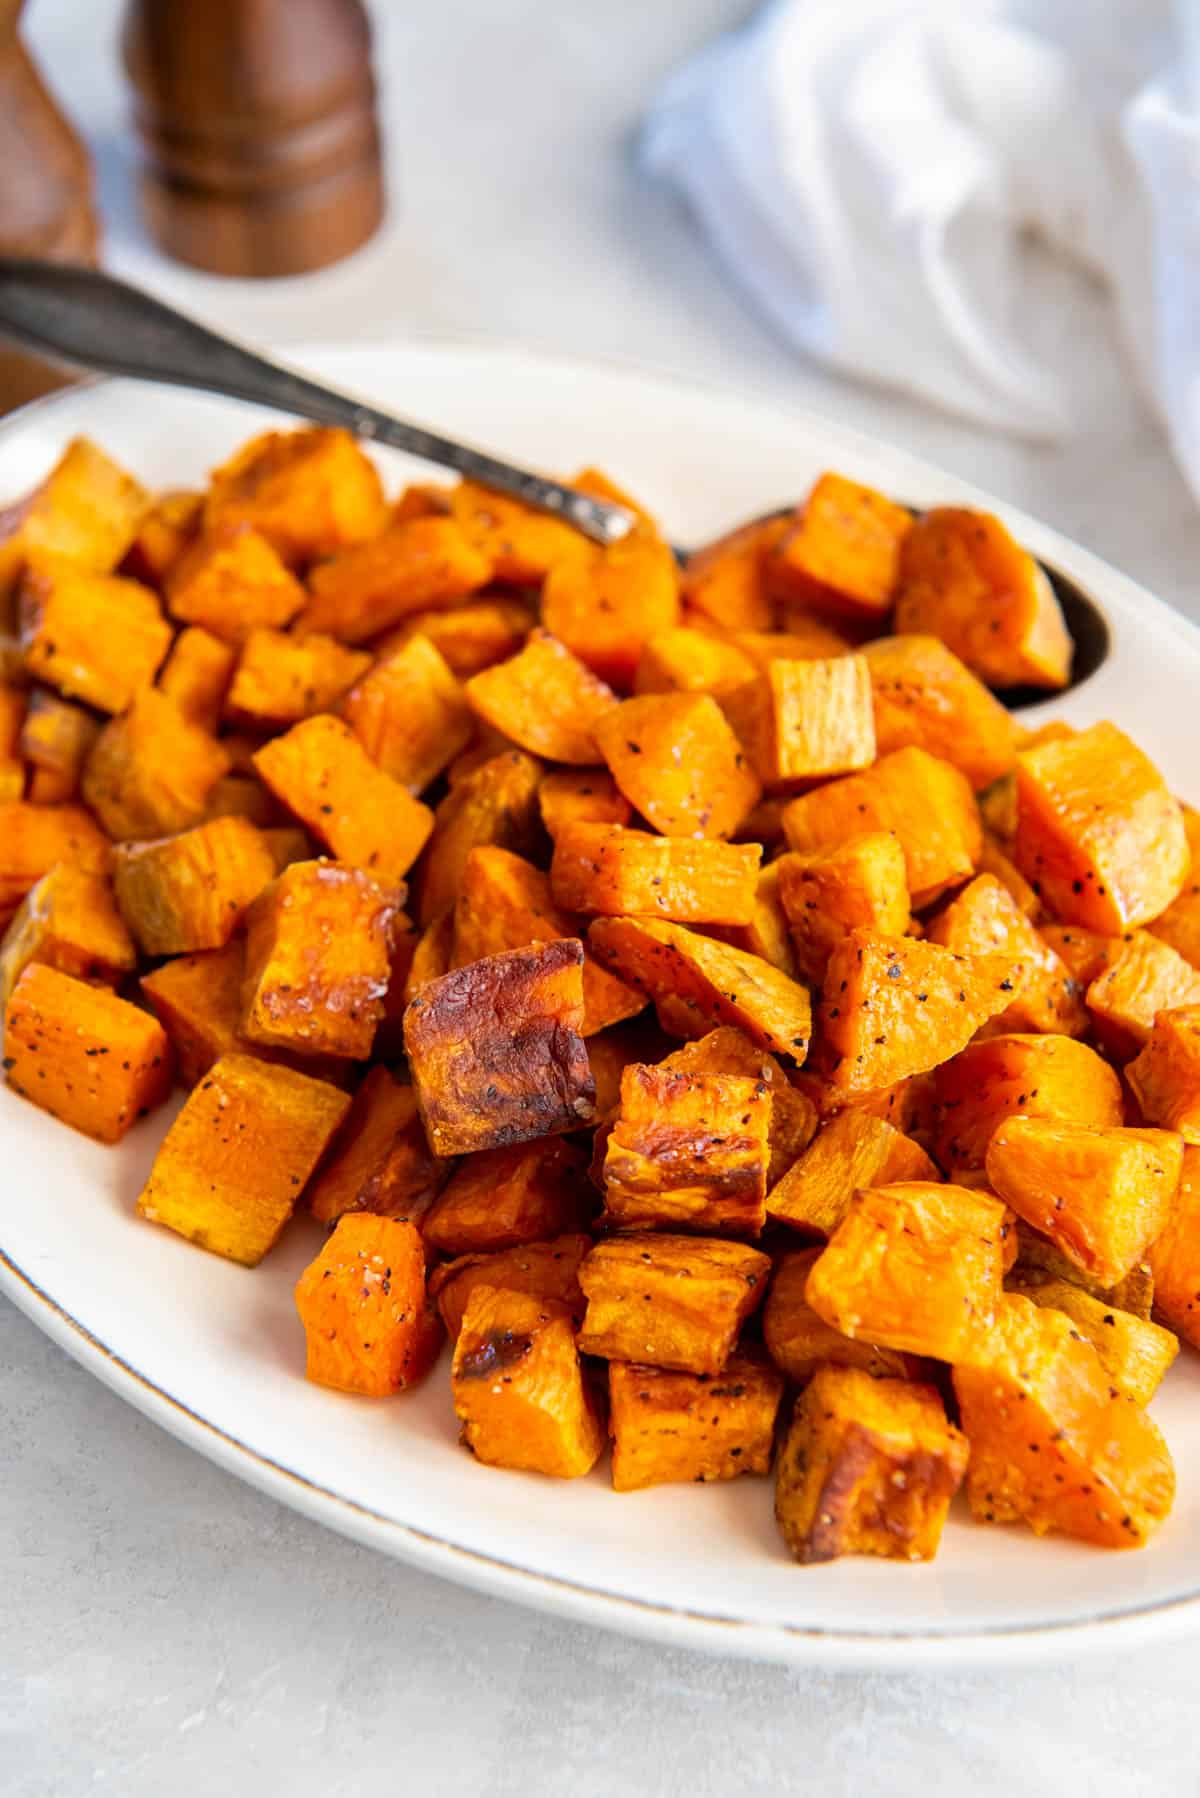 Crispy roasted sweet potatoes on a white plate for serving with a large serving spoon.